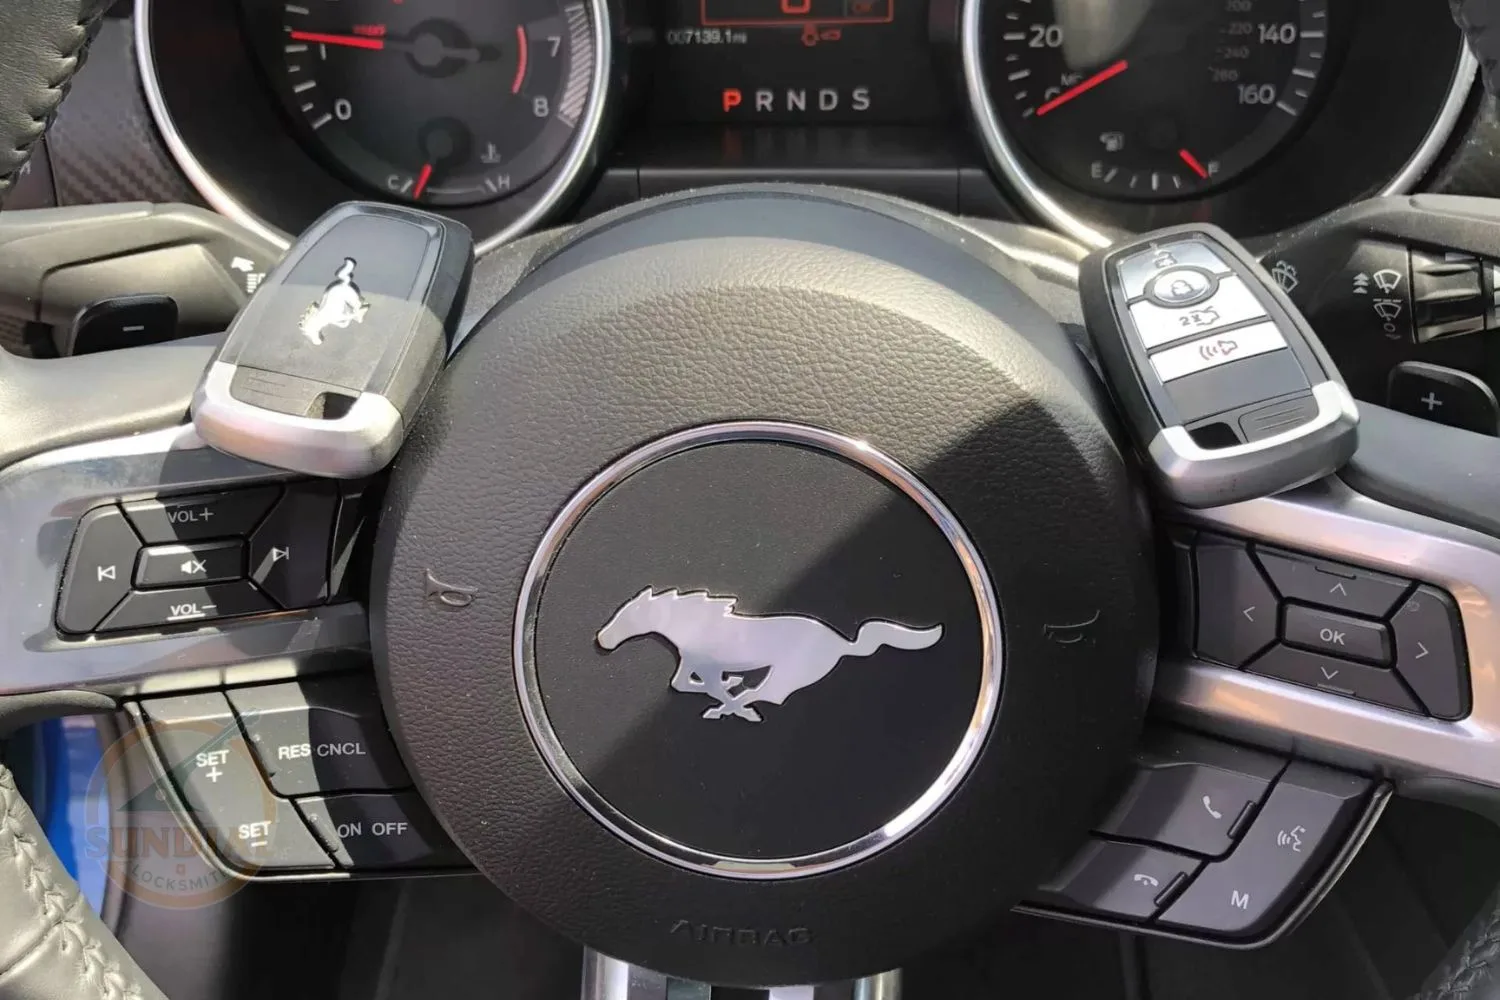 A close-up view of two Ford Mustang key fobs on the steering wheel with audio and cruise control buttons, against the backdrop of the car's instrument cluster.